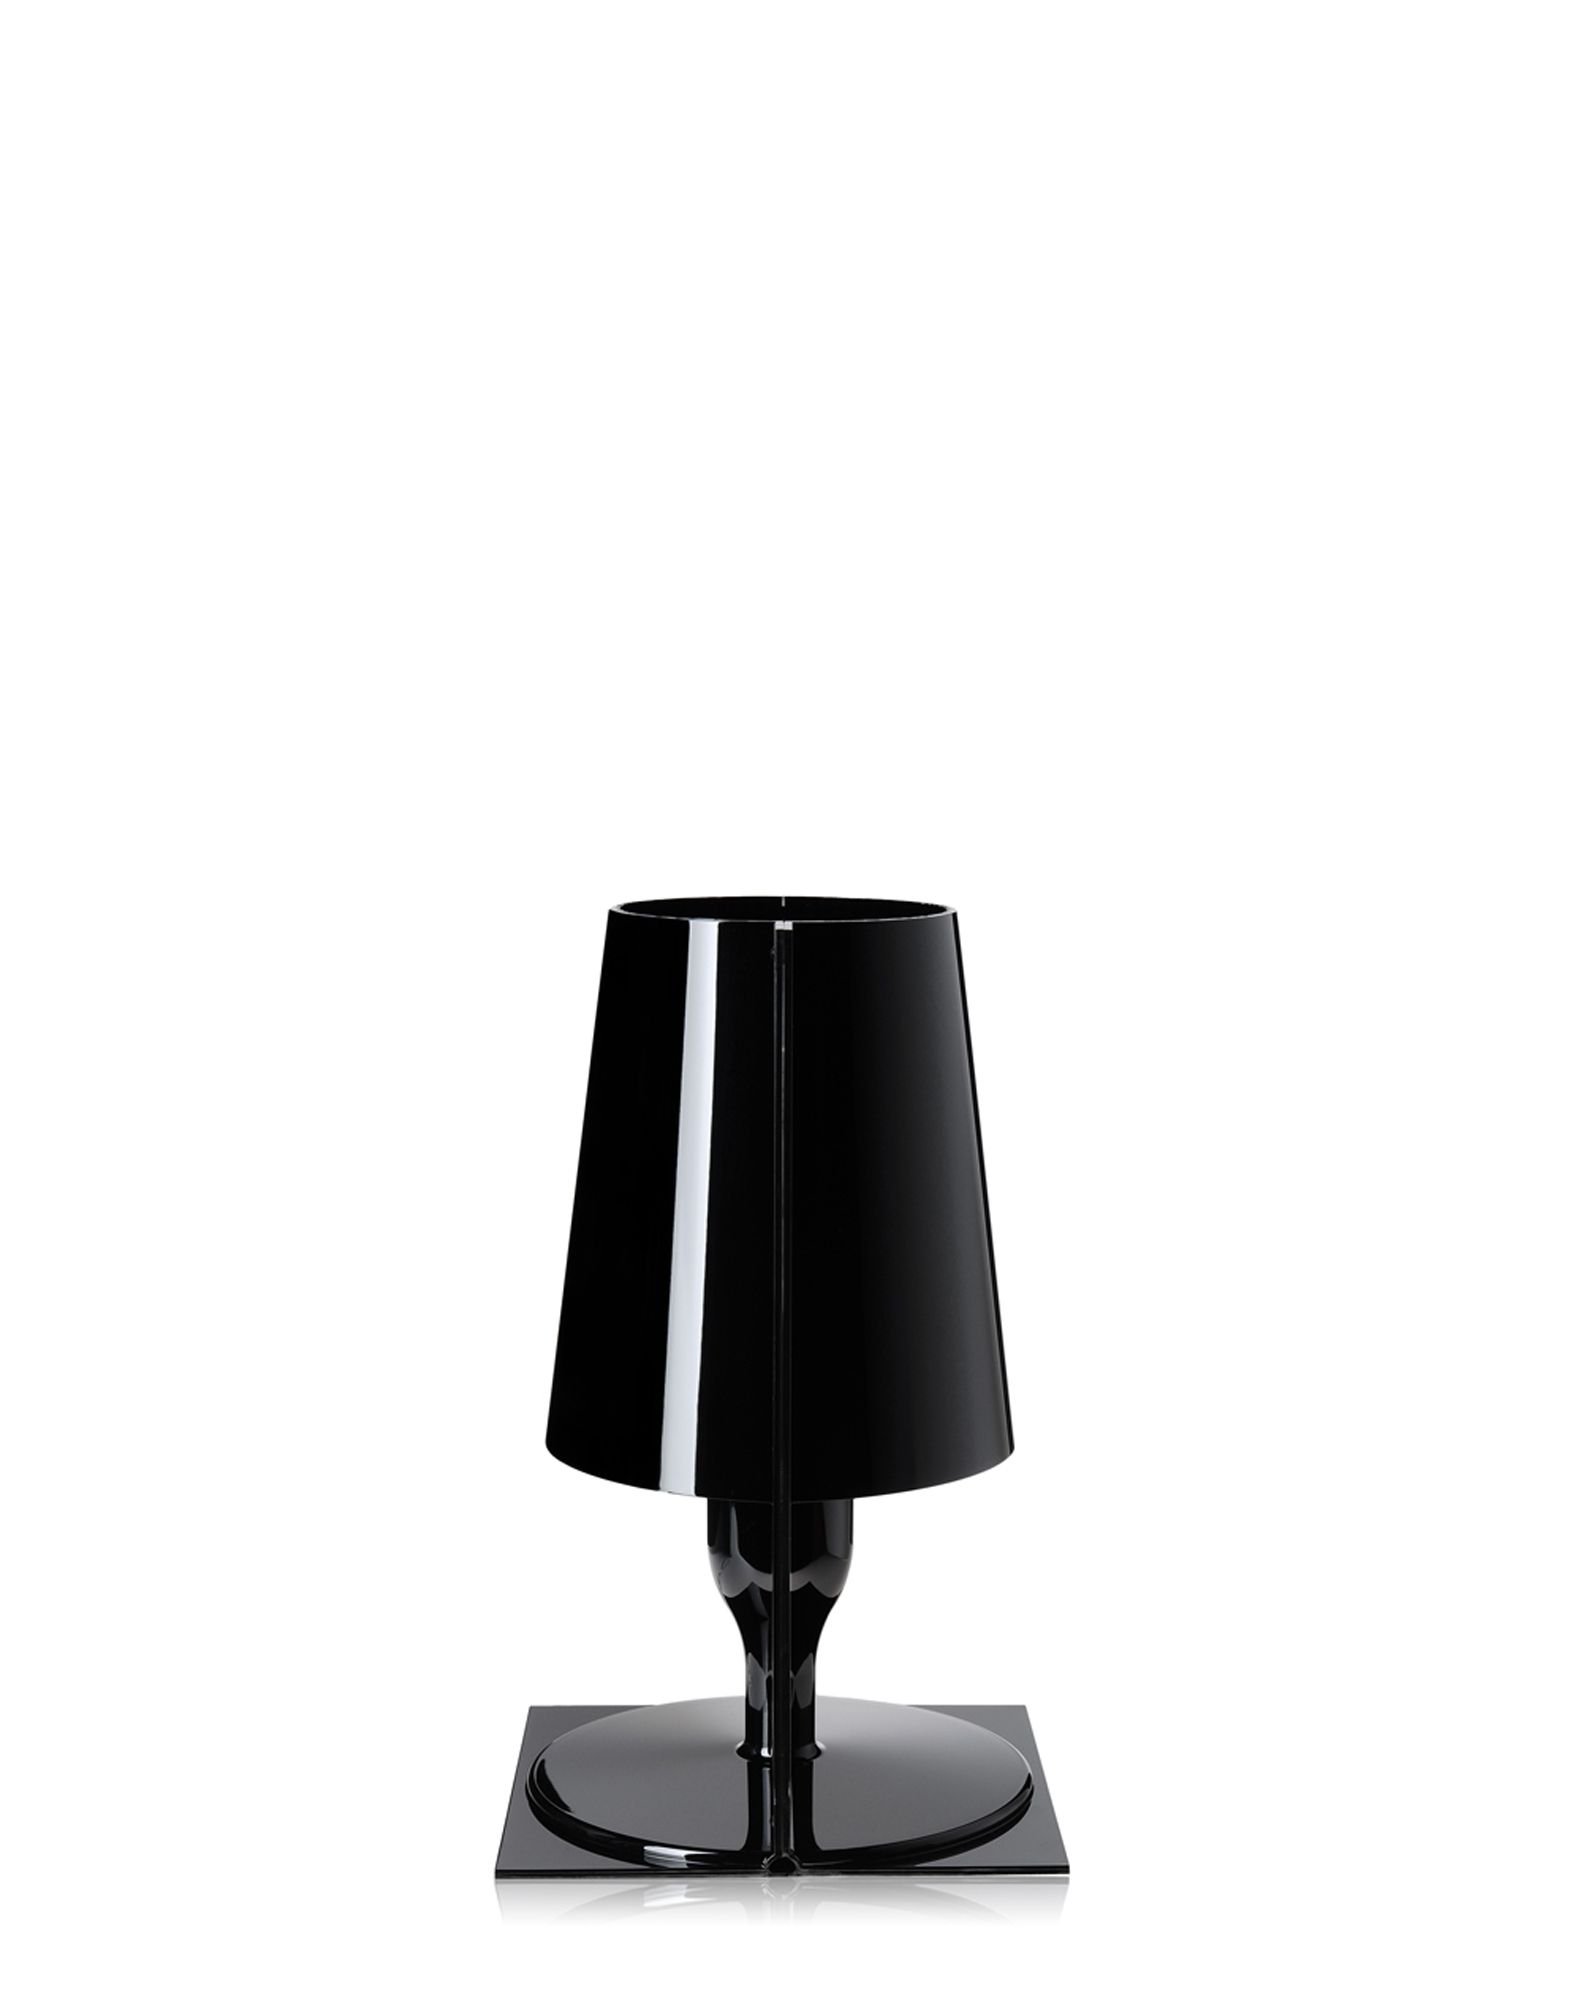 Take Table Lamp lighting from Kartell, designed by Ferruccio Laviani